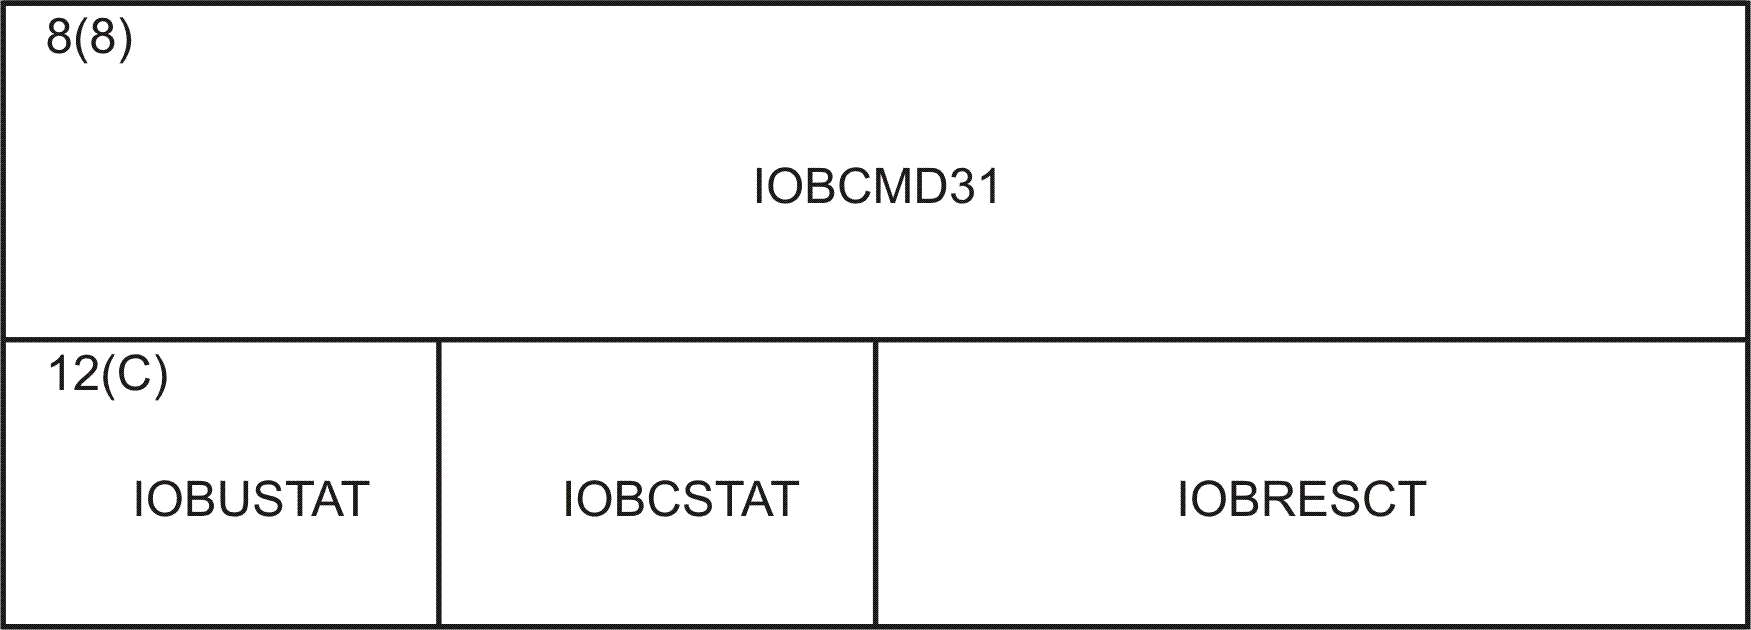 IOBFLAG3 and IOBCSW fields for format 1 channel program